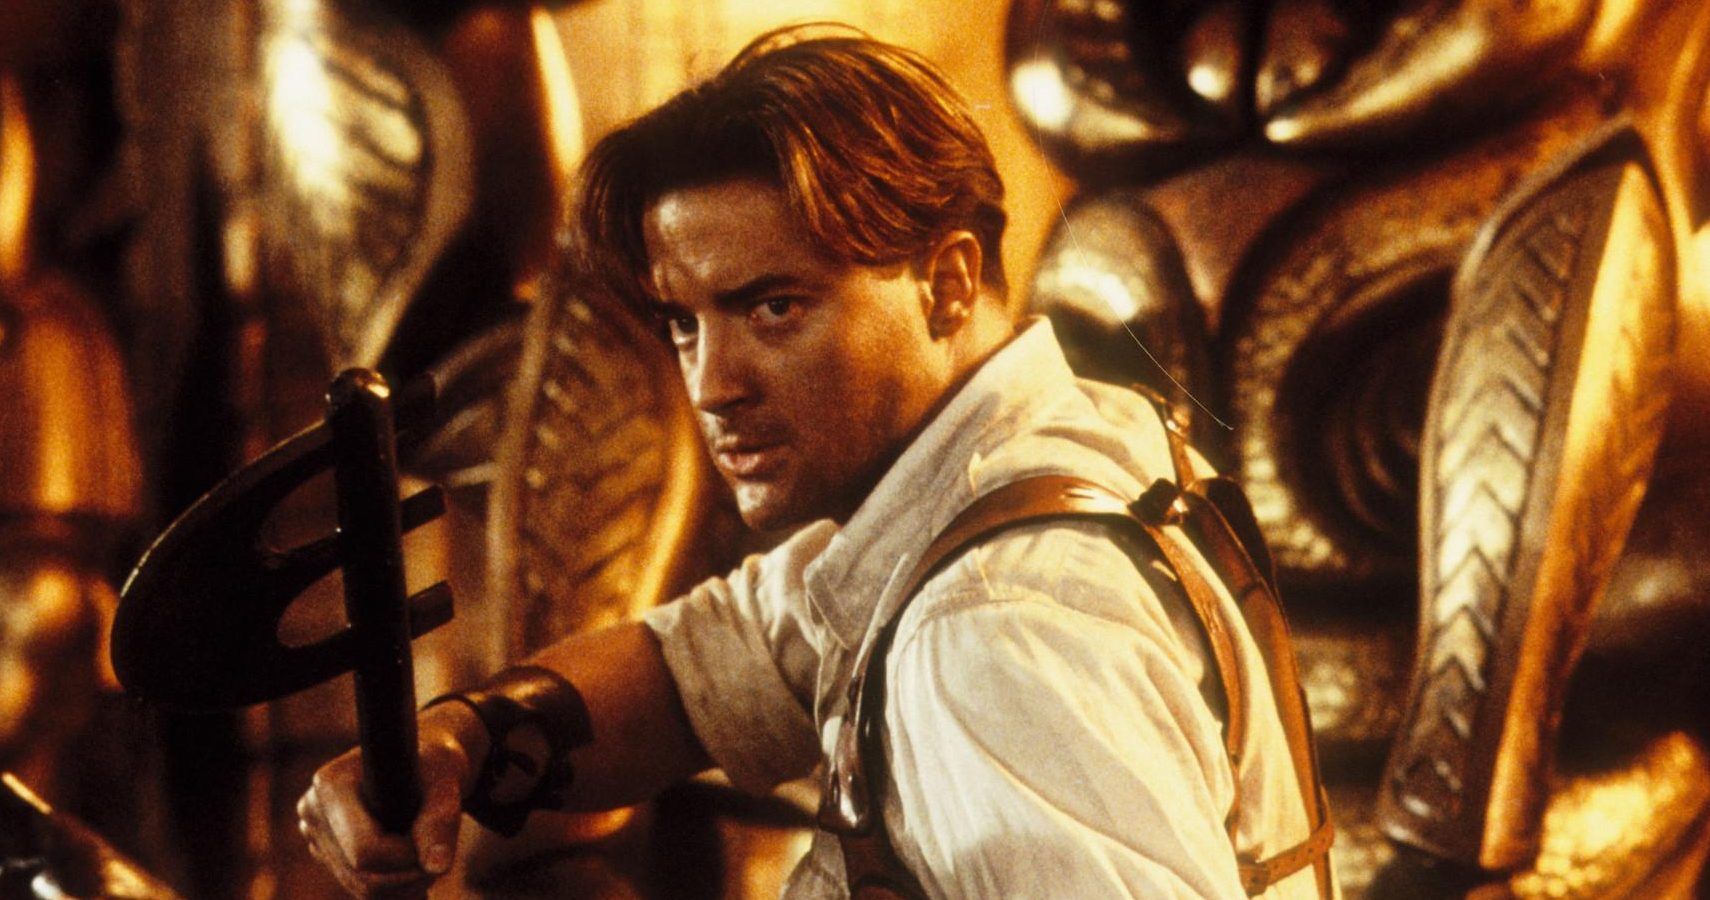 A Brendan Fraser and Darren Aronofsky film?.........we're intrigued!